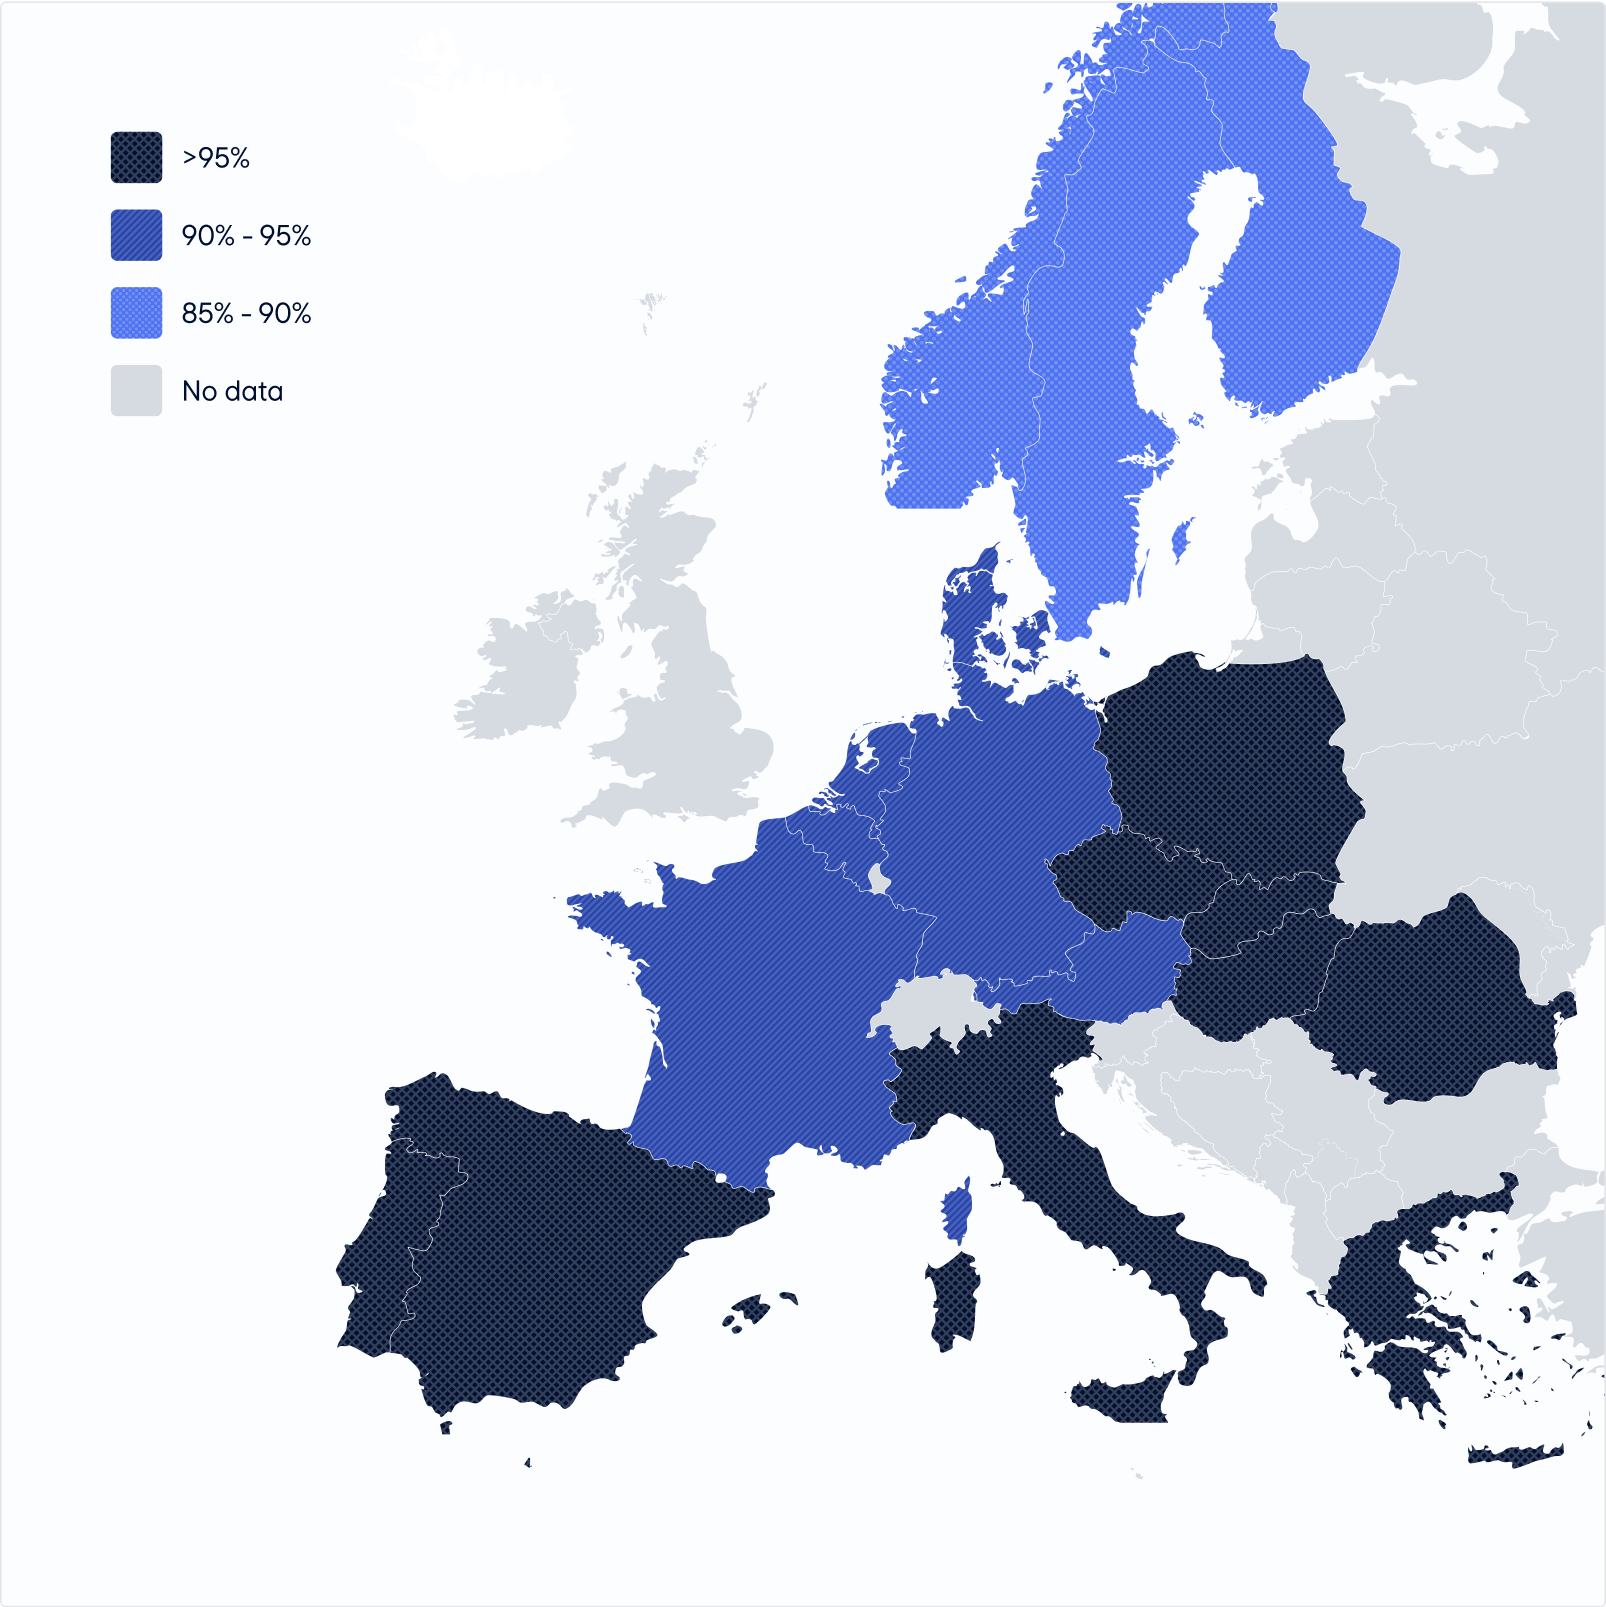 Map of Europe with results per country. Details in table below with caption Ranked test results per member state.